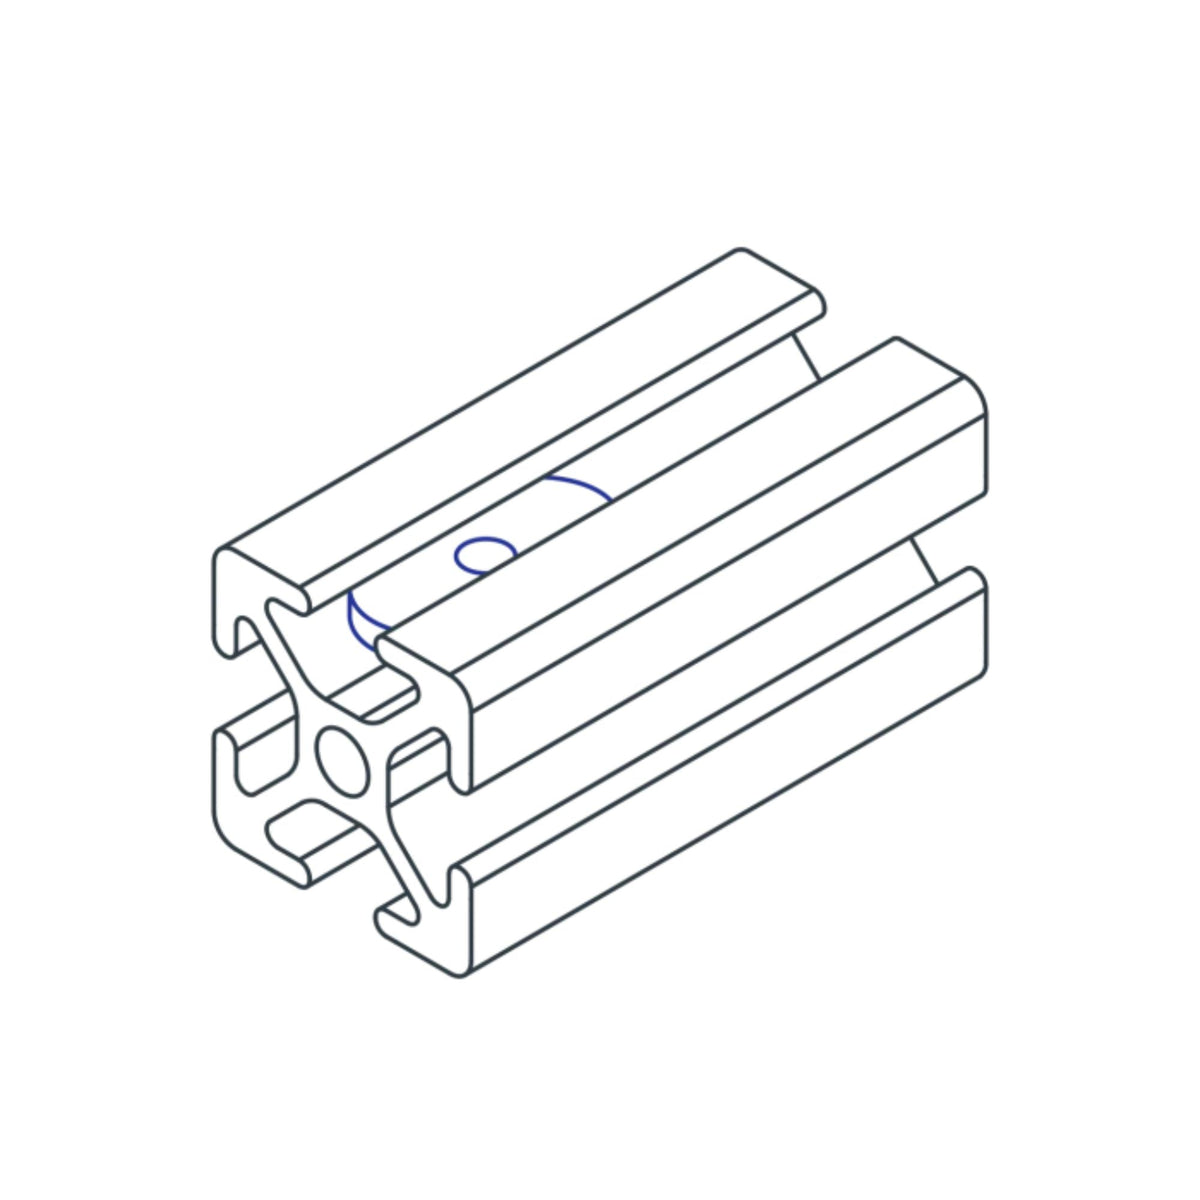 diagram of a t-nut being inserted into the t-slot of a metal bar